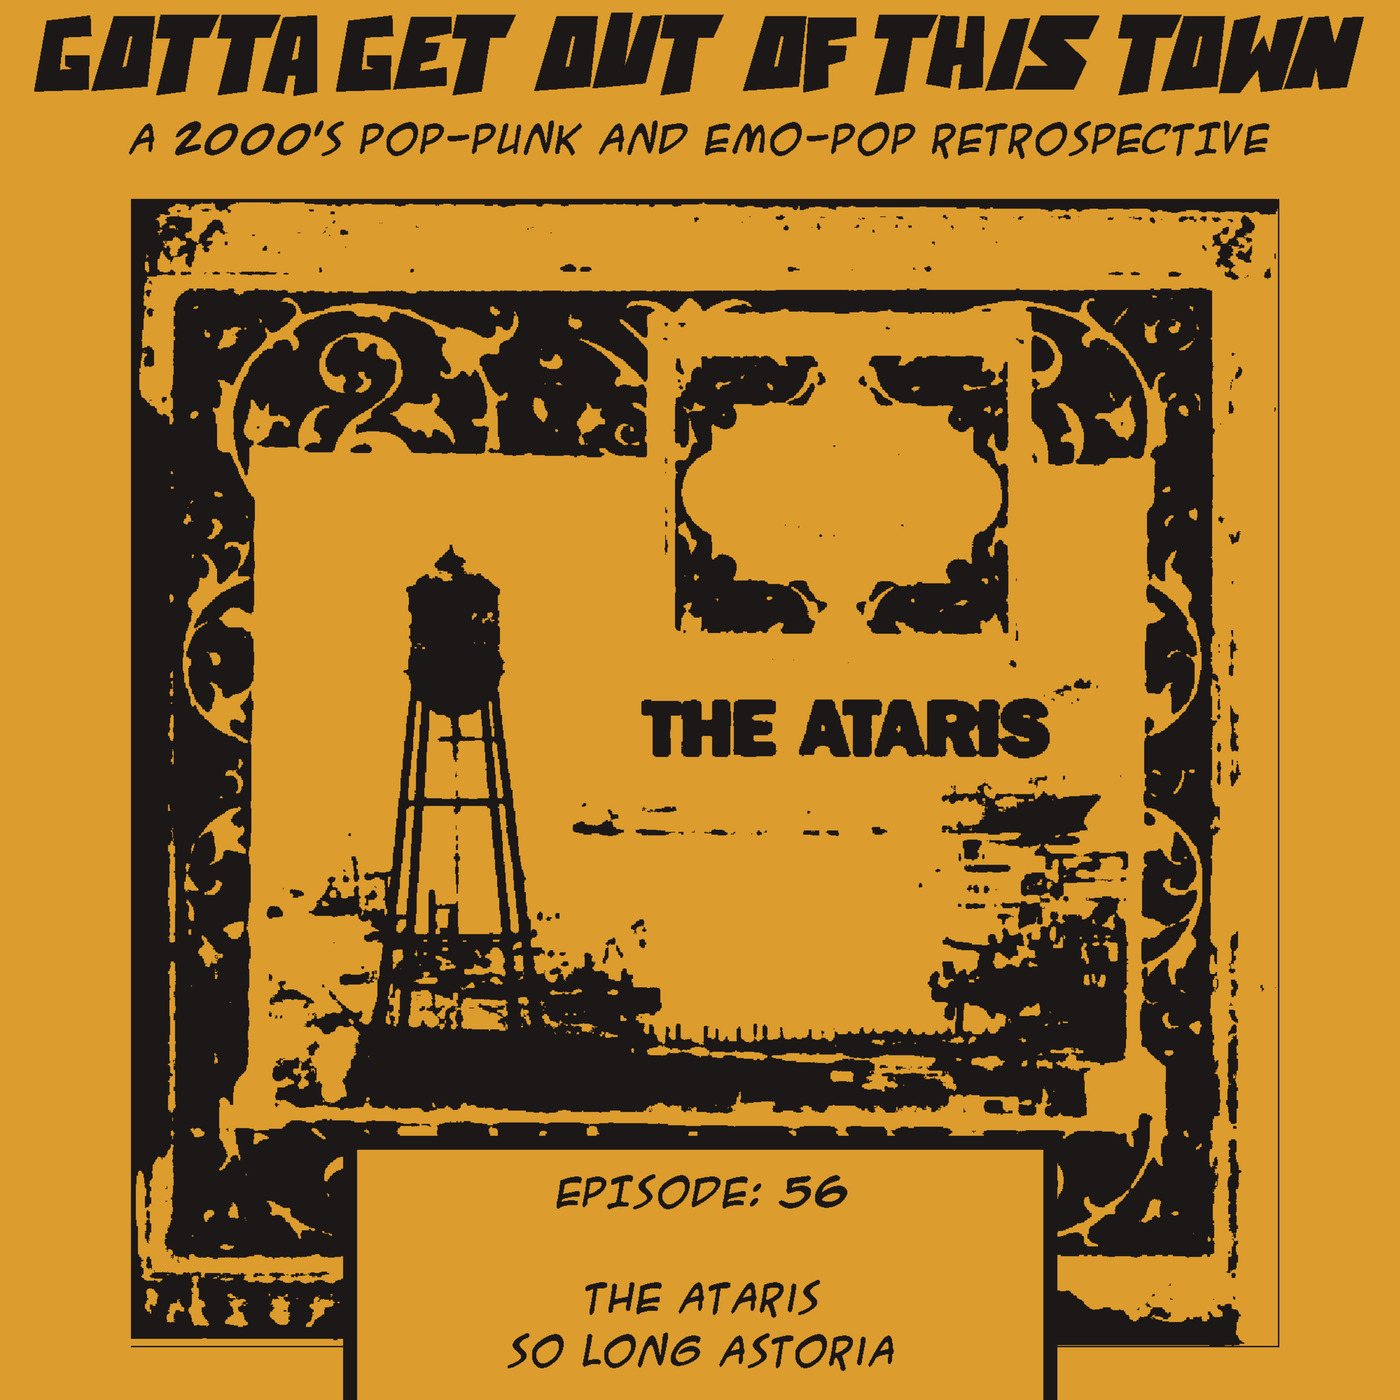 Gotta Get Out Of This Town Episode 56: The Ataris - So Long Astoria